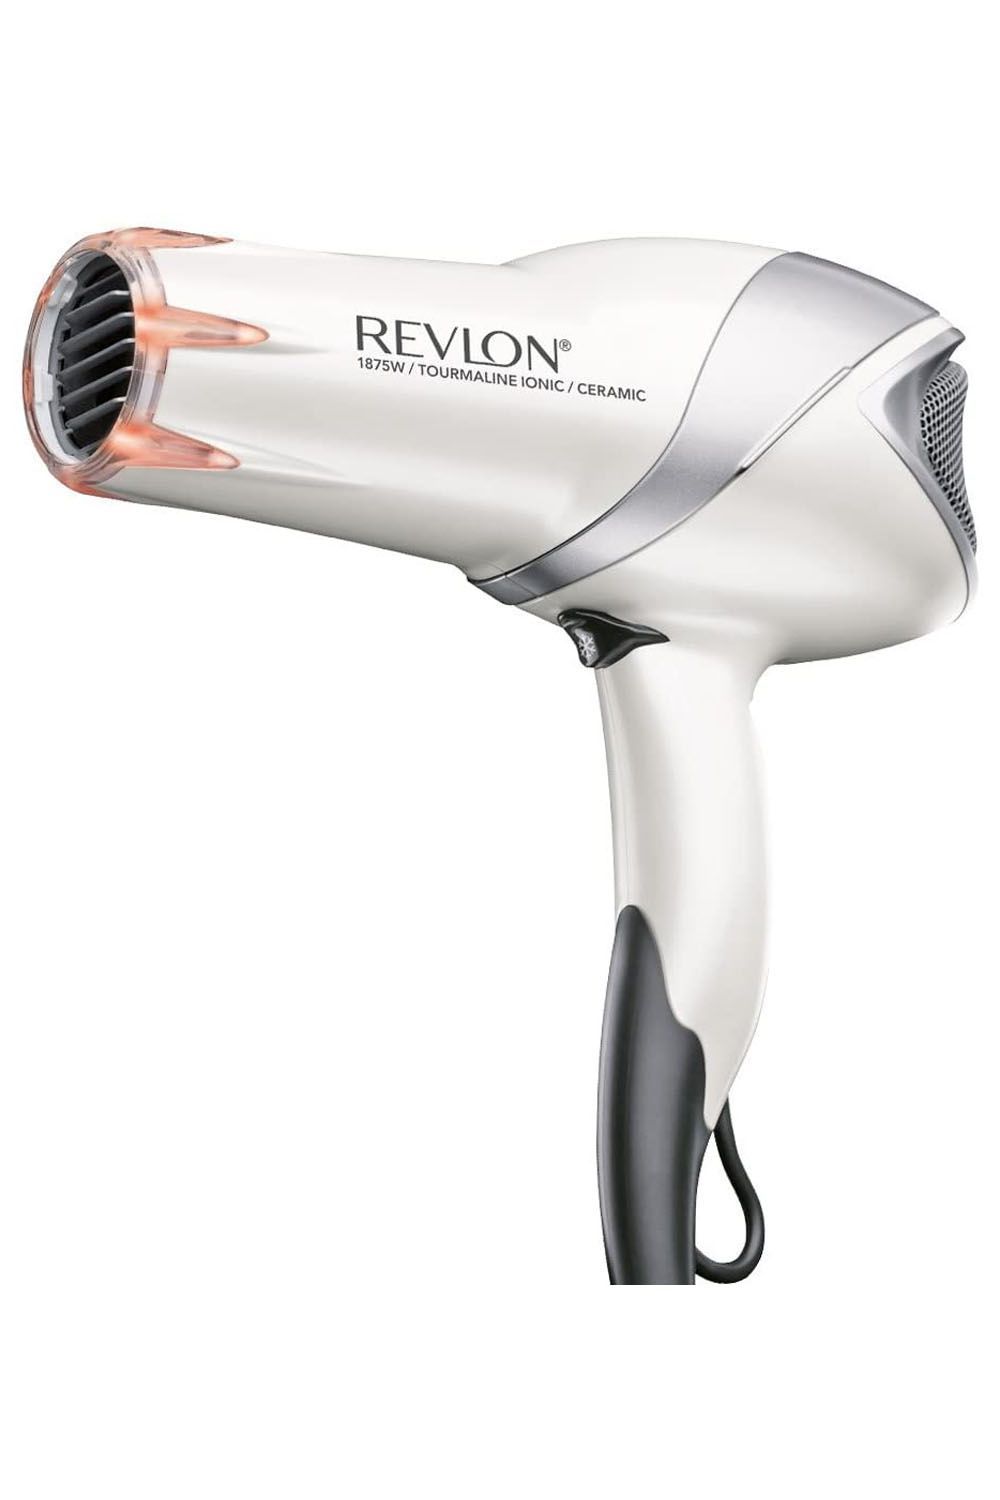 13 Best Affordable Hair Dryers Under $60 of 2023